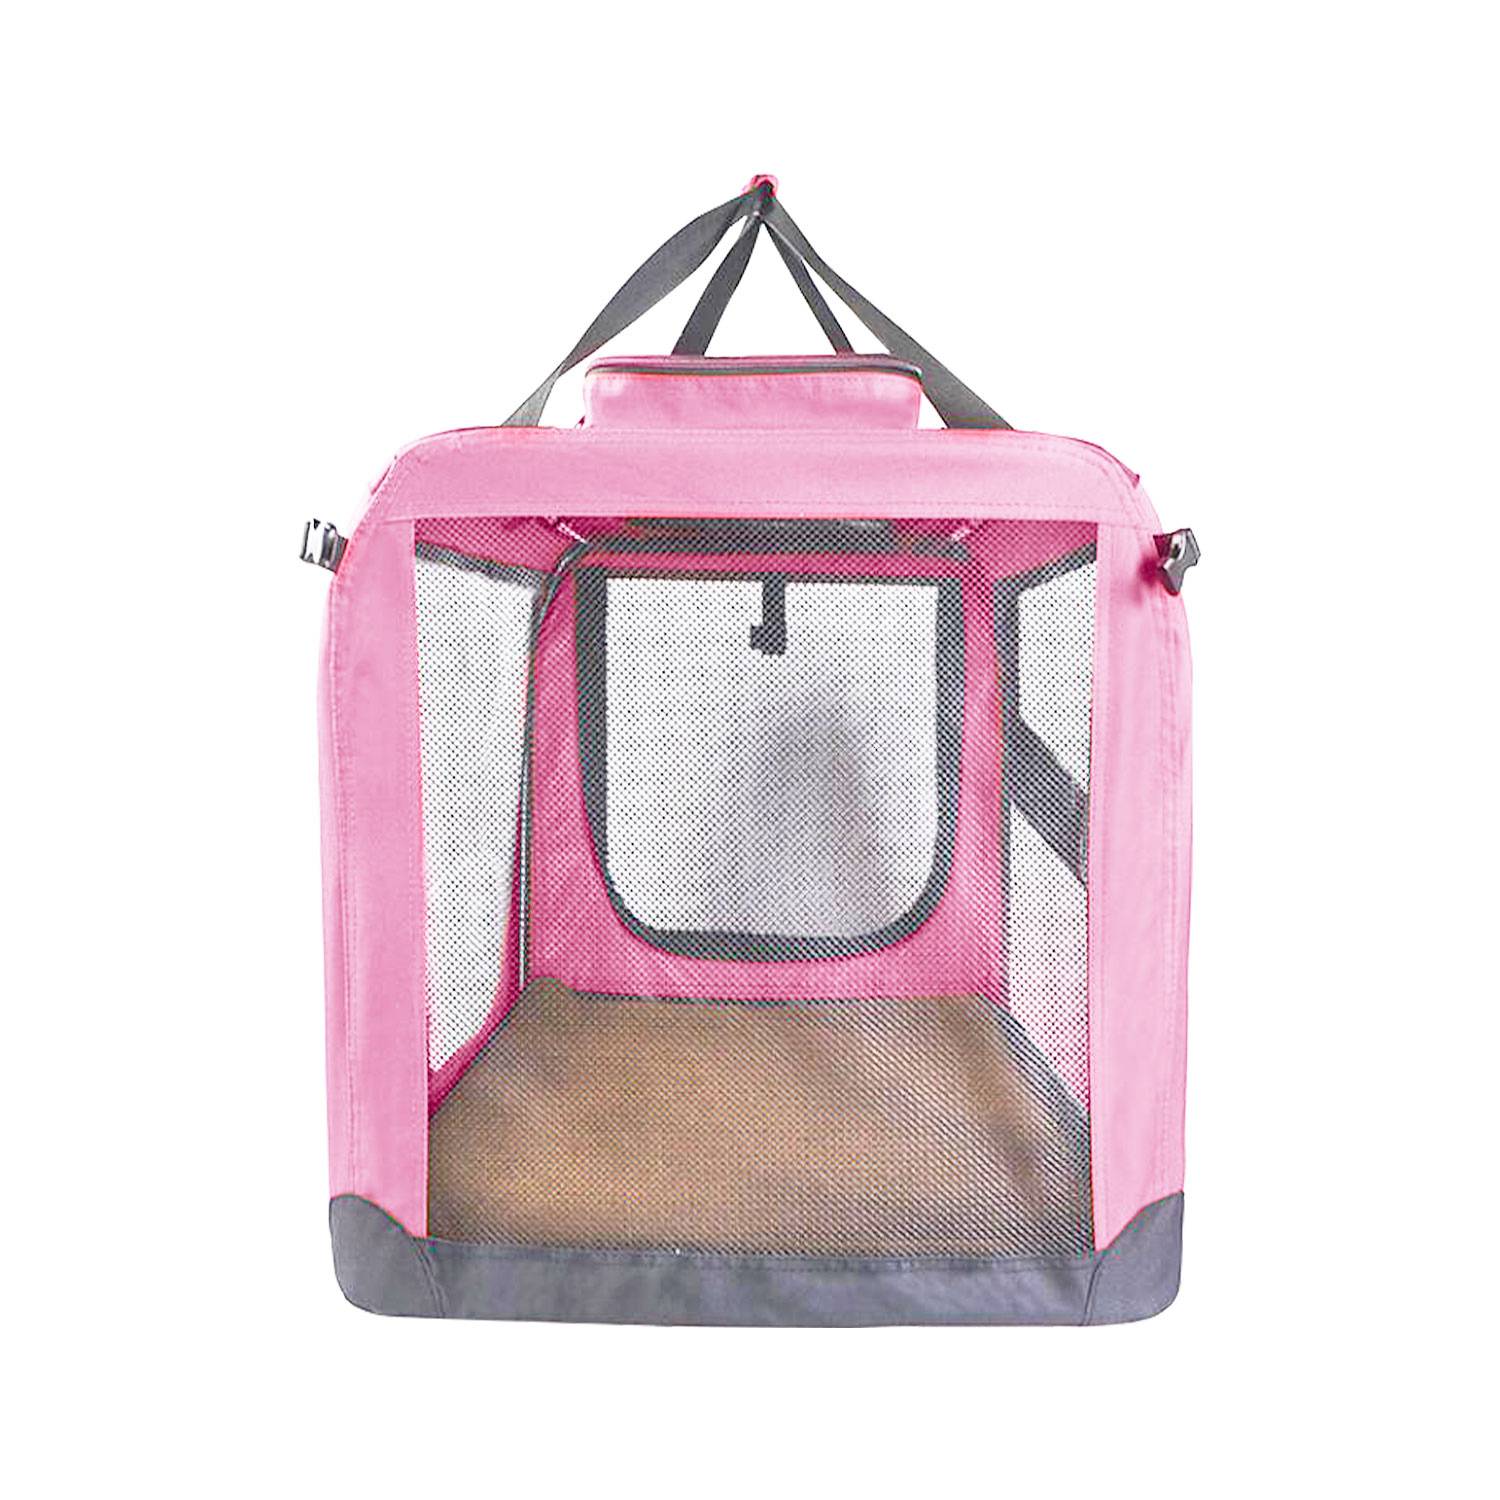 Portable Pet Carrier-Model 1-Xl and M Size Blue/Pink/Grey